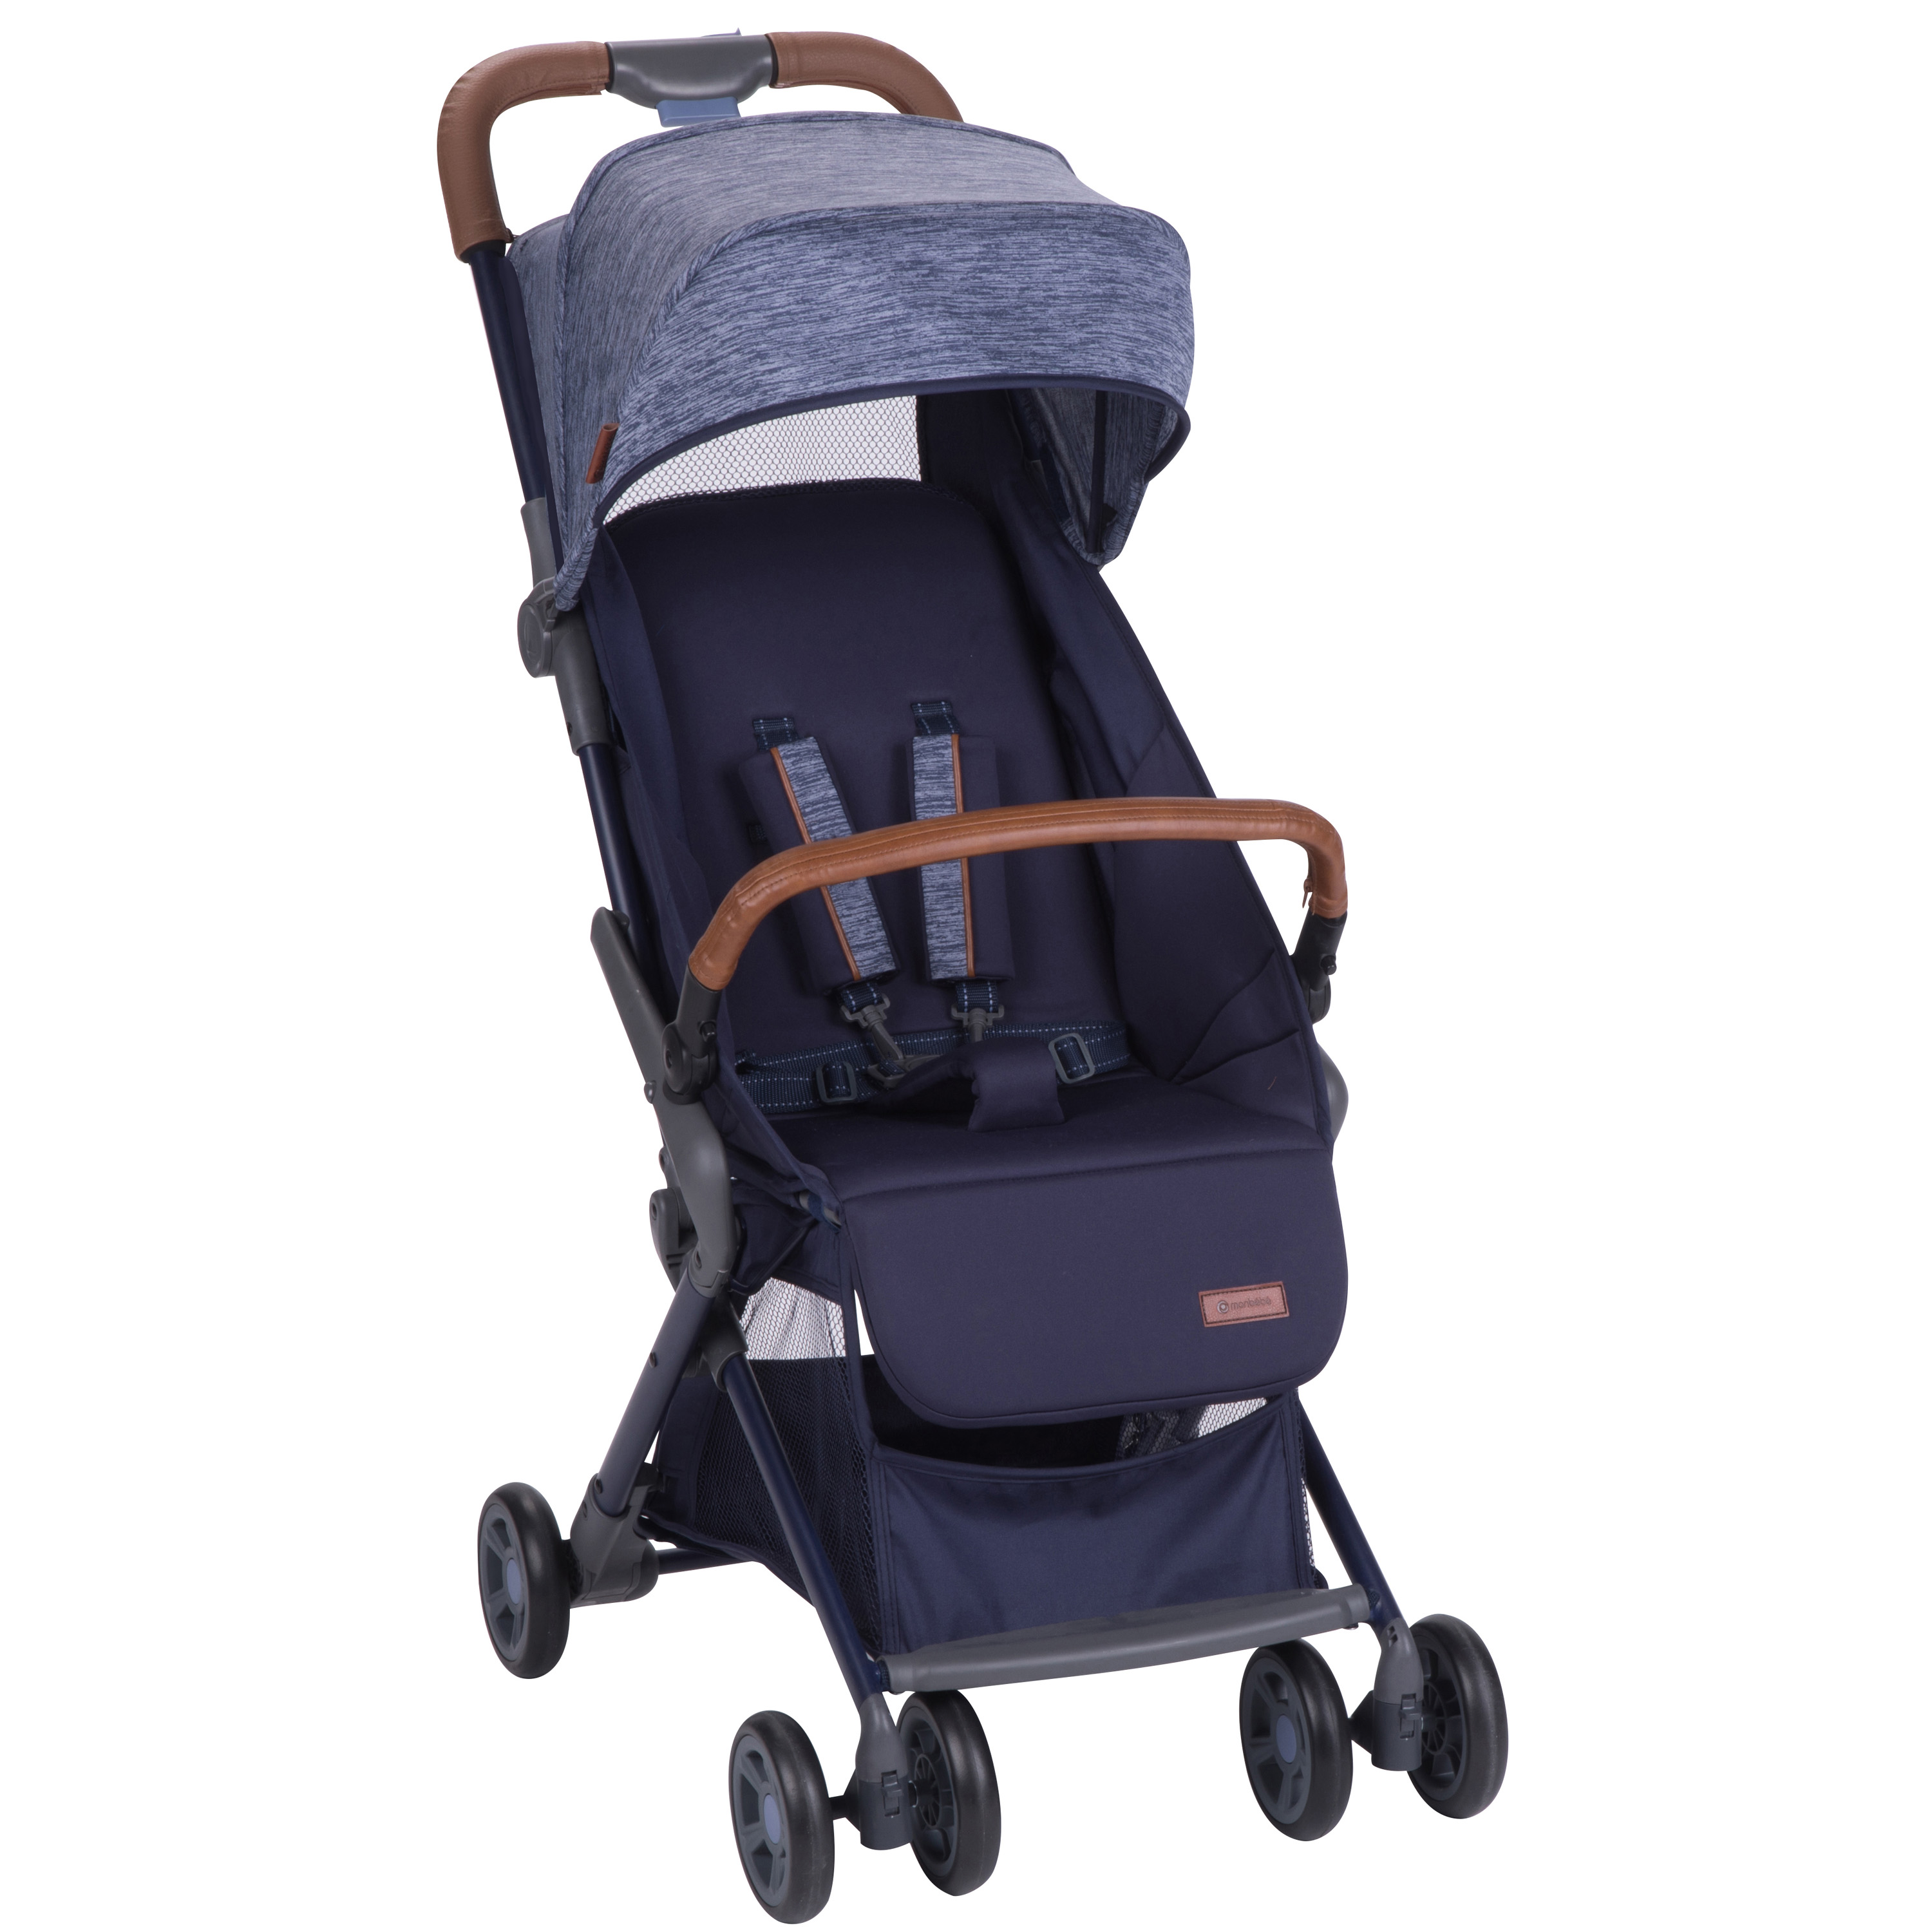 MonBebe Cube Compact Stroller with storage and visor, Blue Boho - image 1 of 17